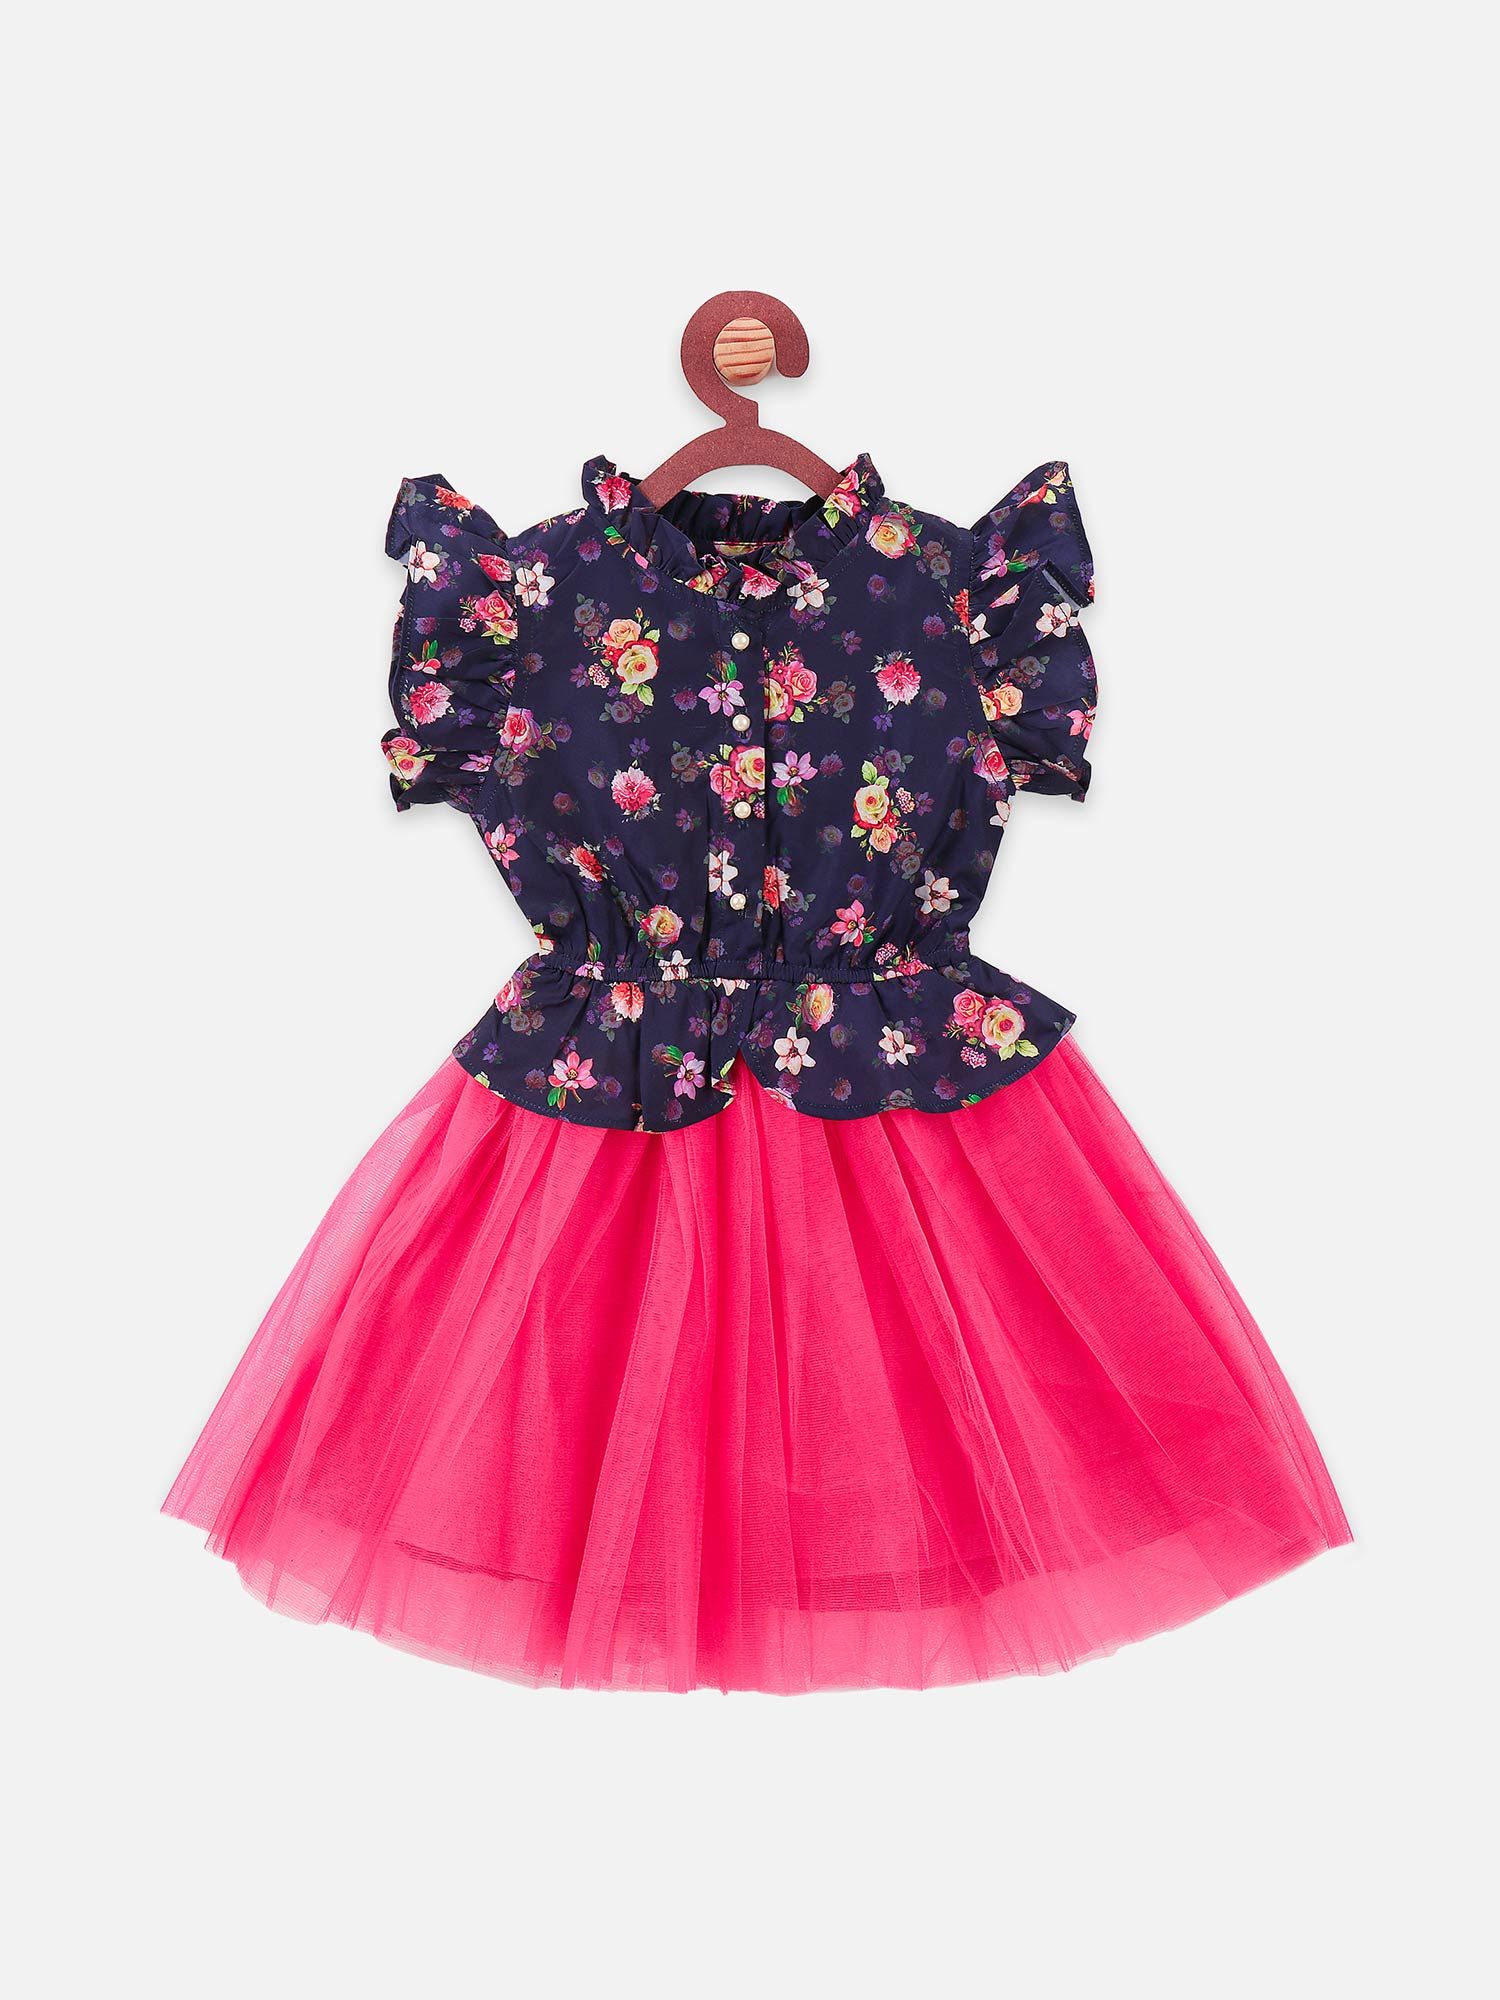 Lilpicks Floral Tulle Dress - Navy Blue (2-3 Years)